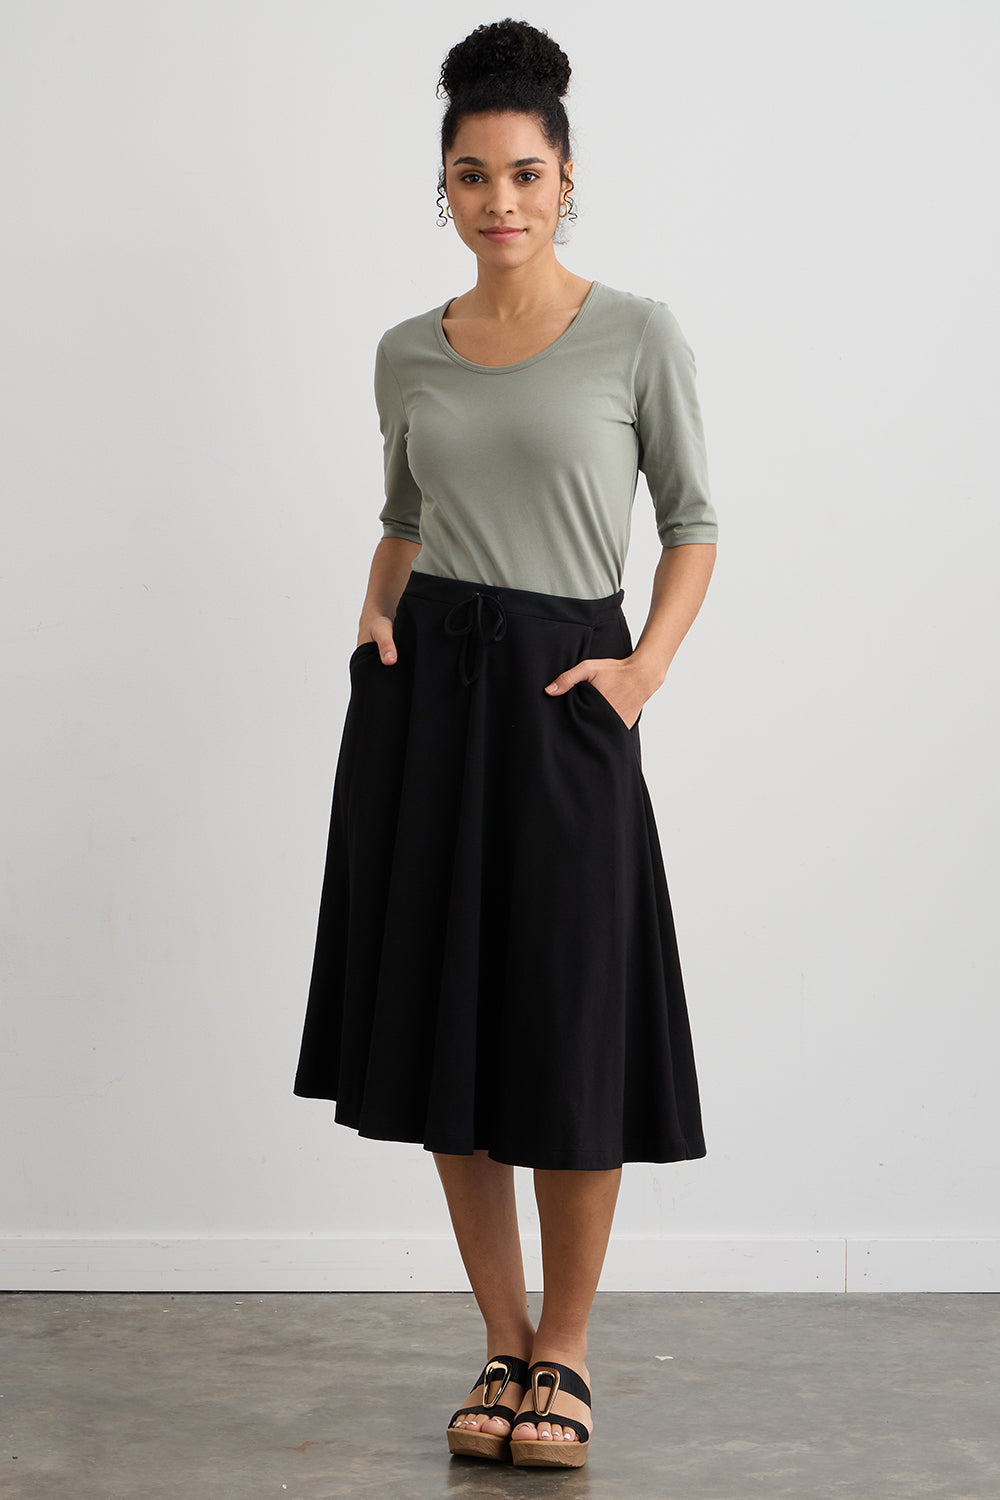 STRETCH IS COMFORT Women's A-Line Skirt with Pockets Black Small